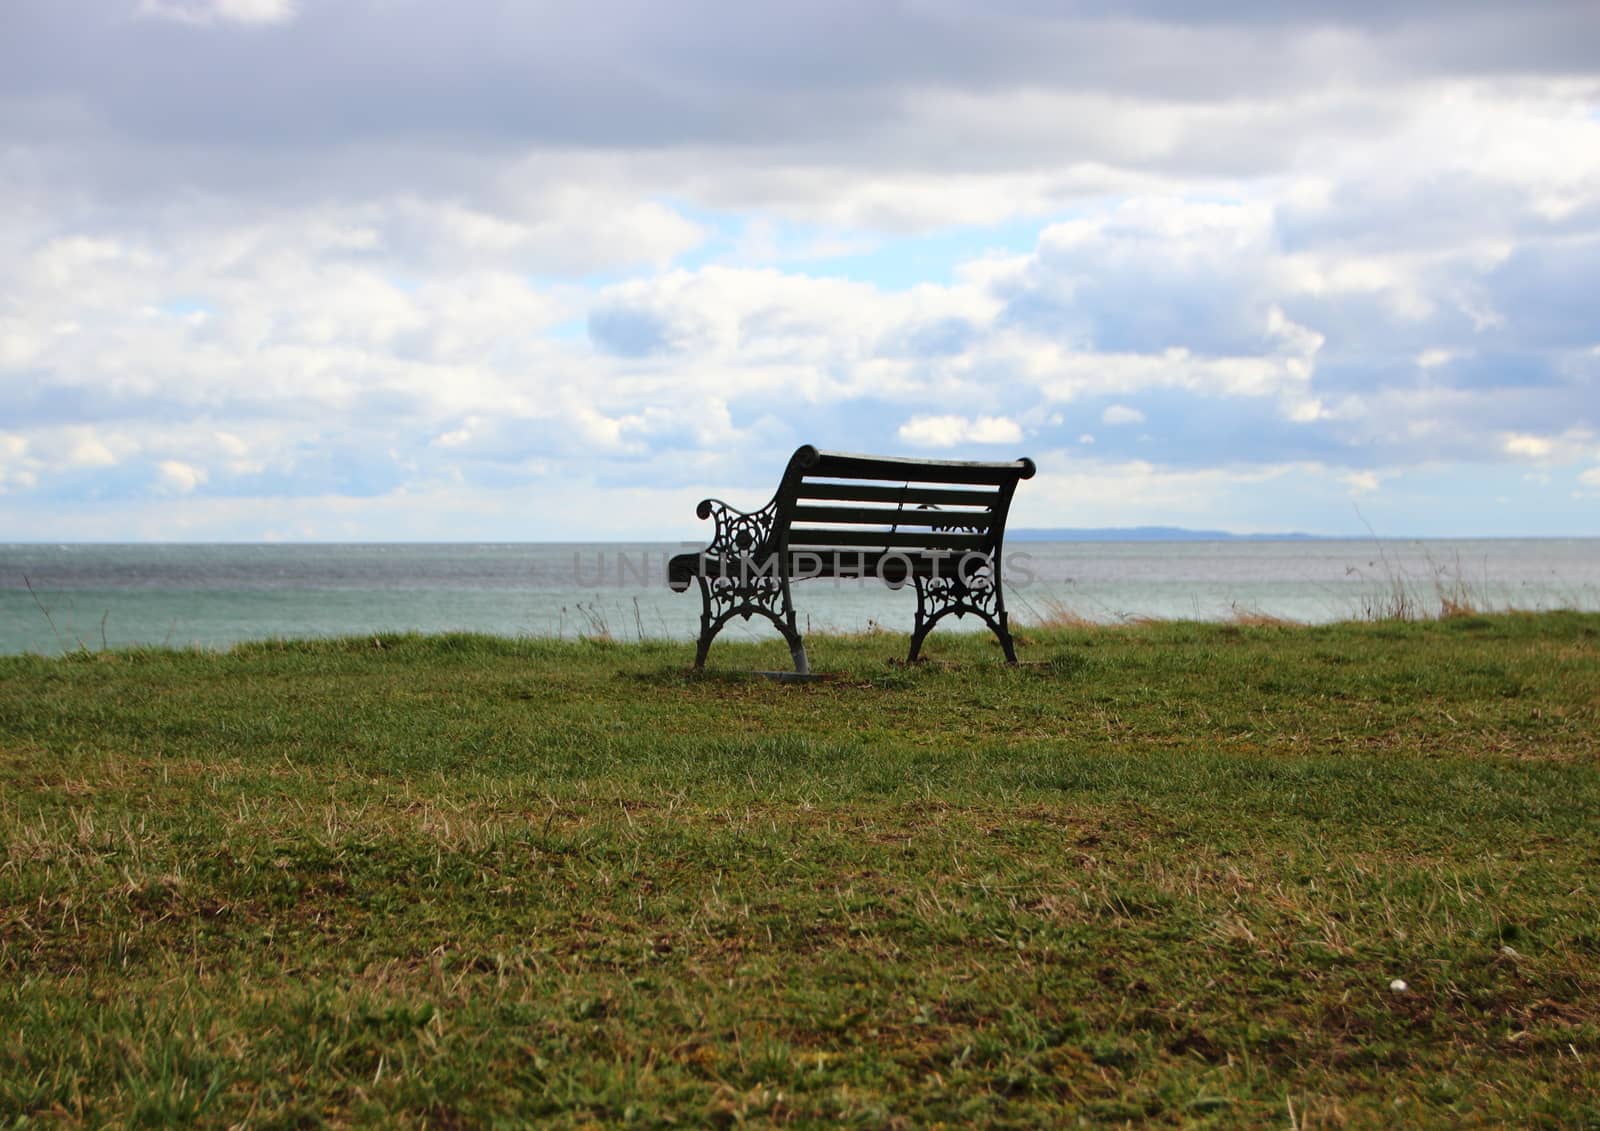 Single Outdoor Iron Bench at Ocean with Clouds by HoleInTheBox